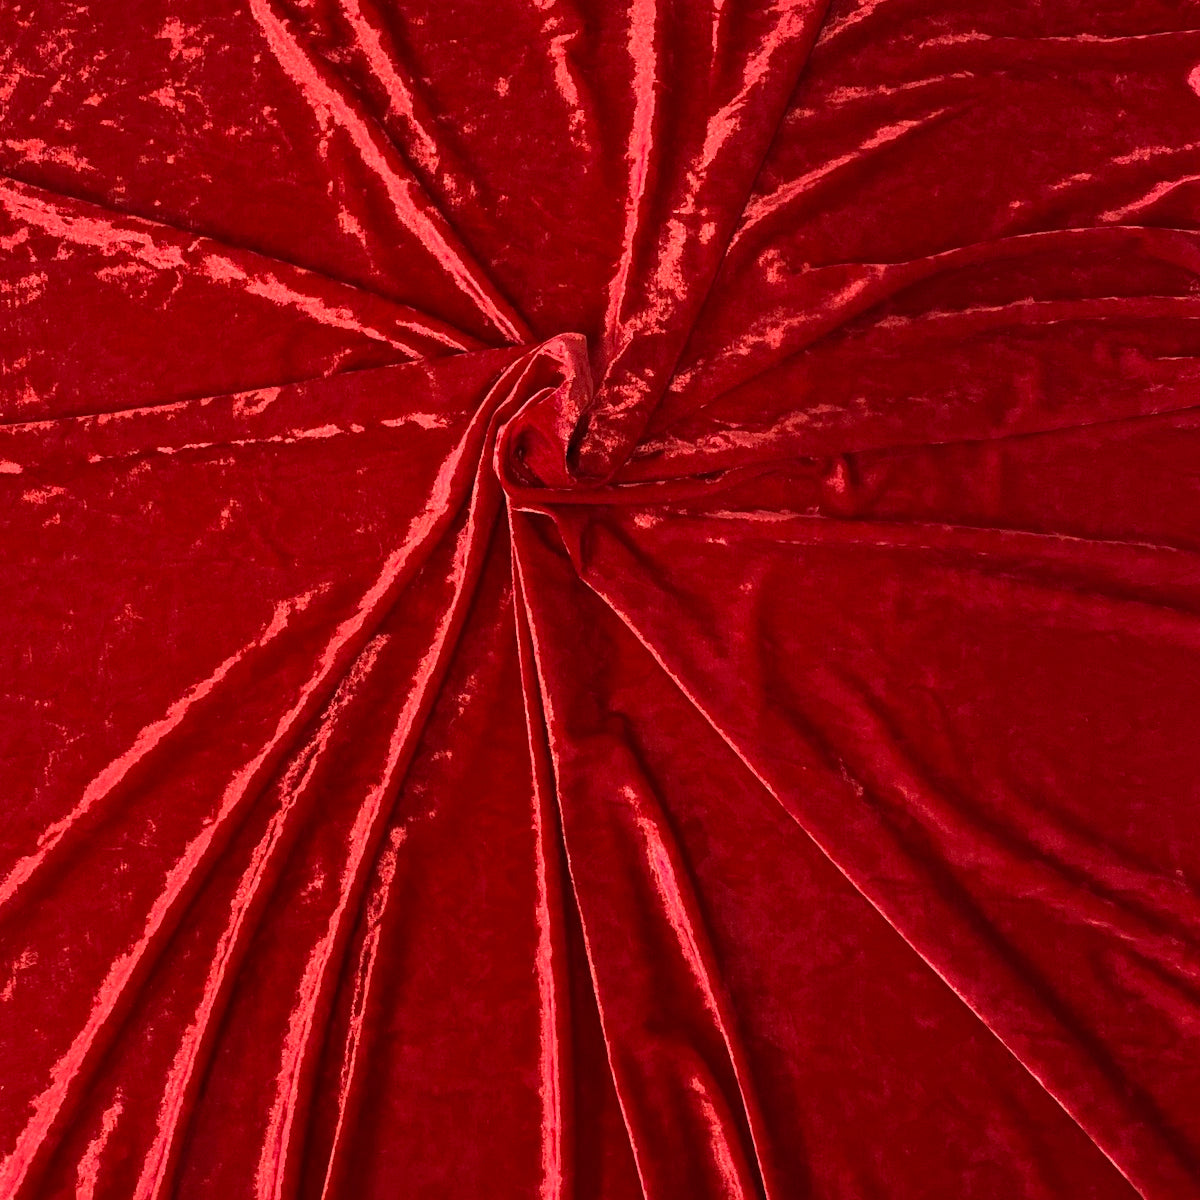 6742925 DANA THEATRE RED Solid Color Velvet Upholstery Fabric